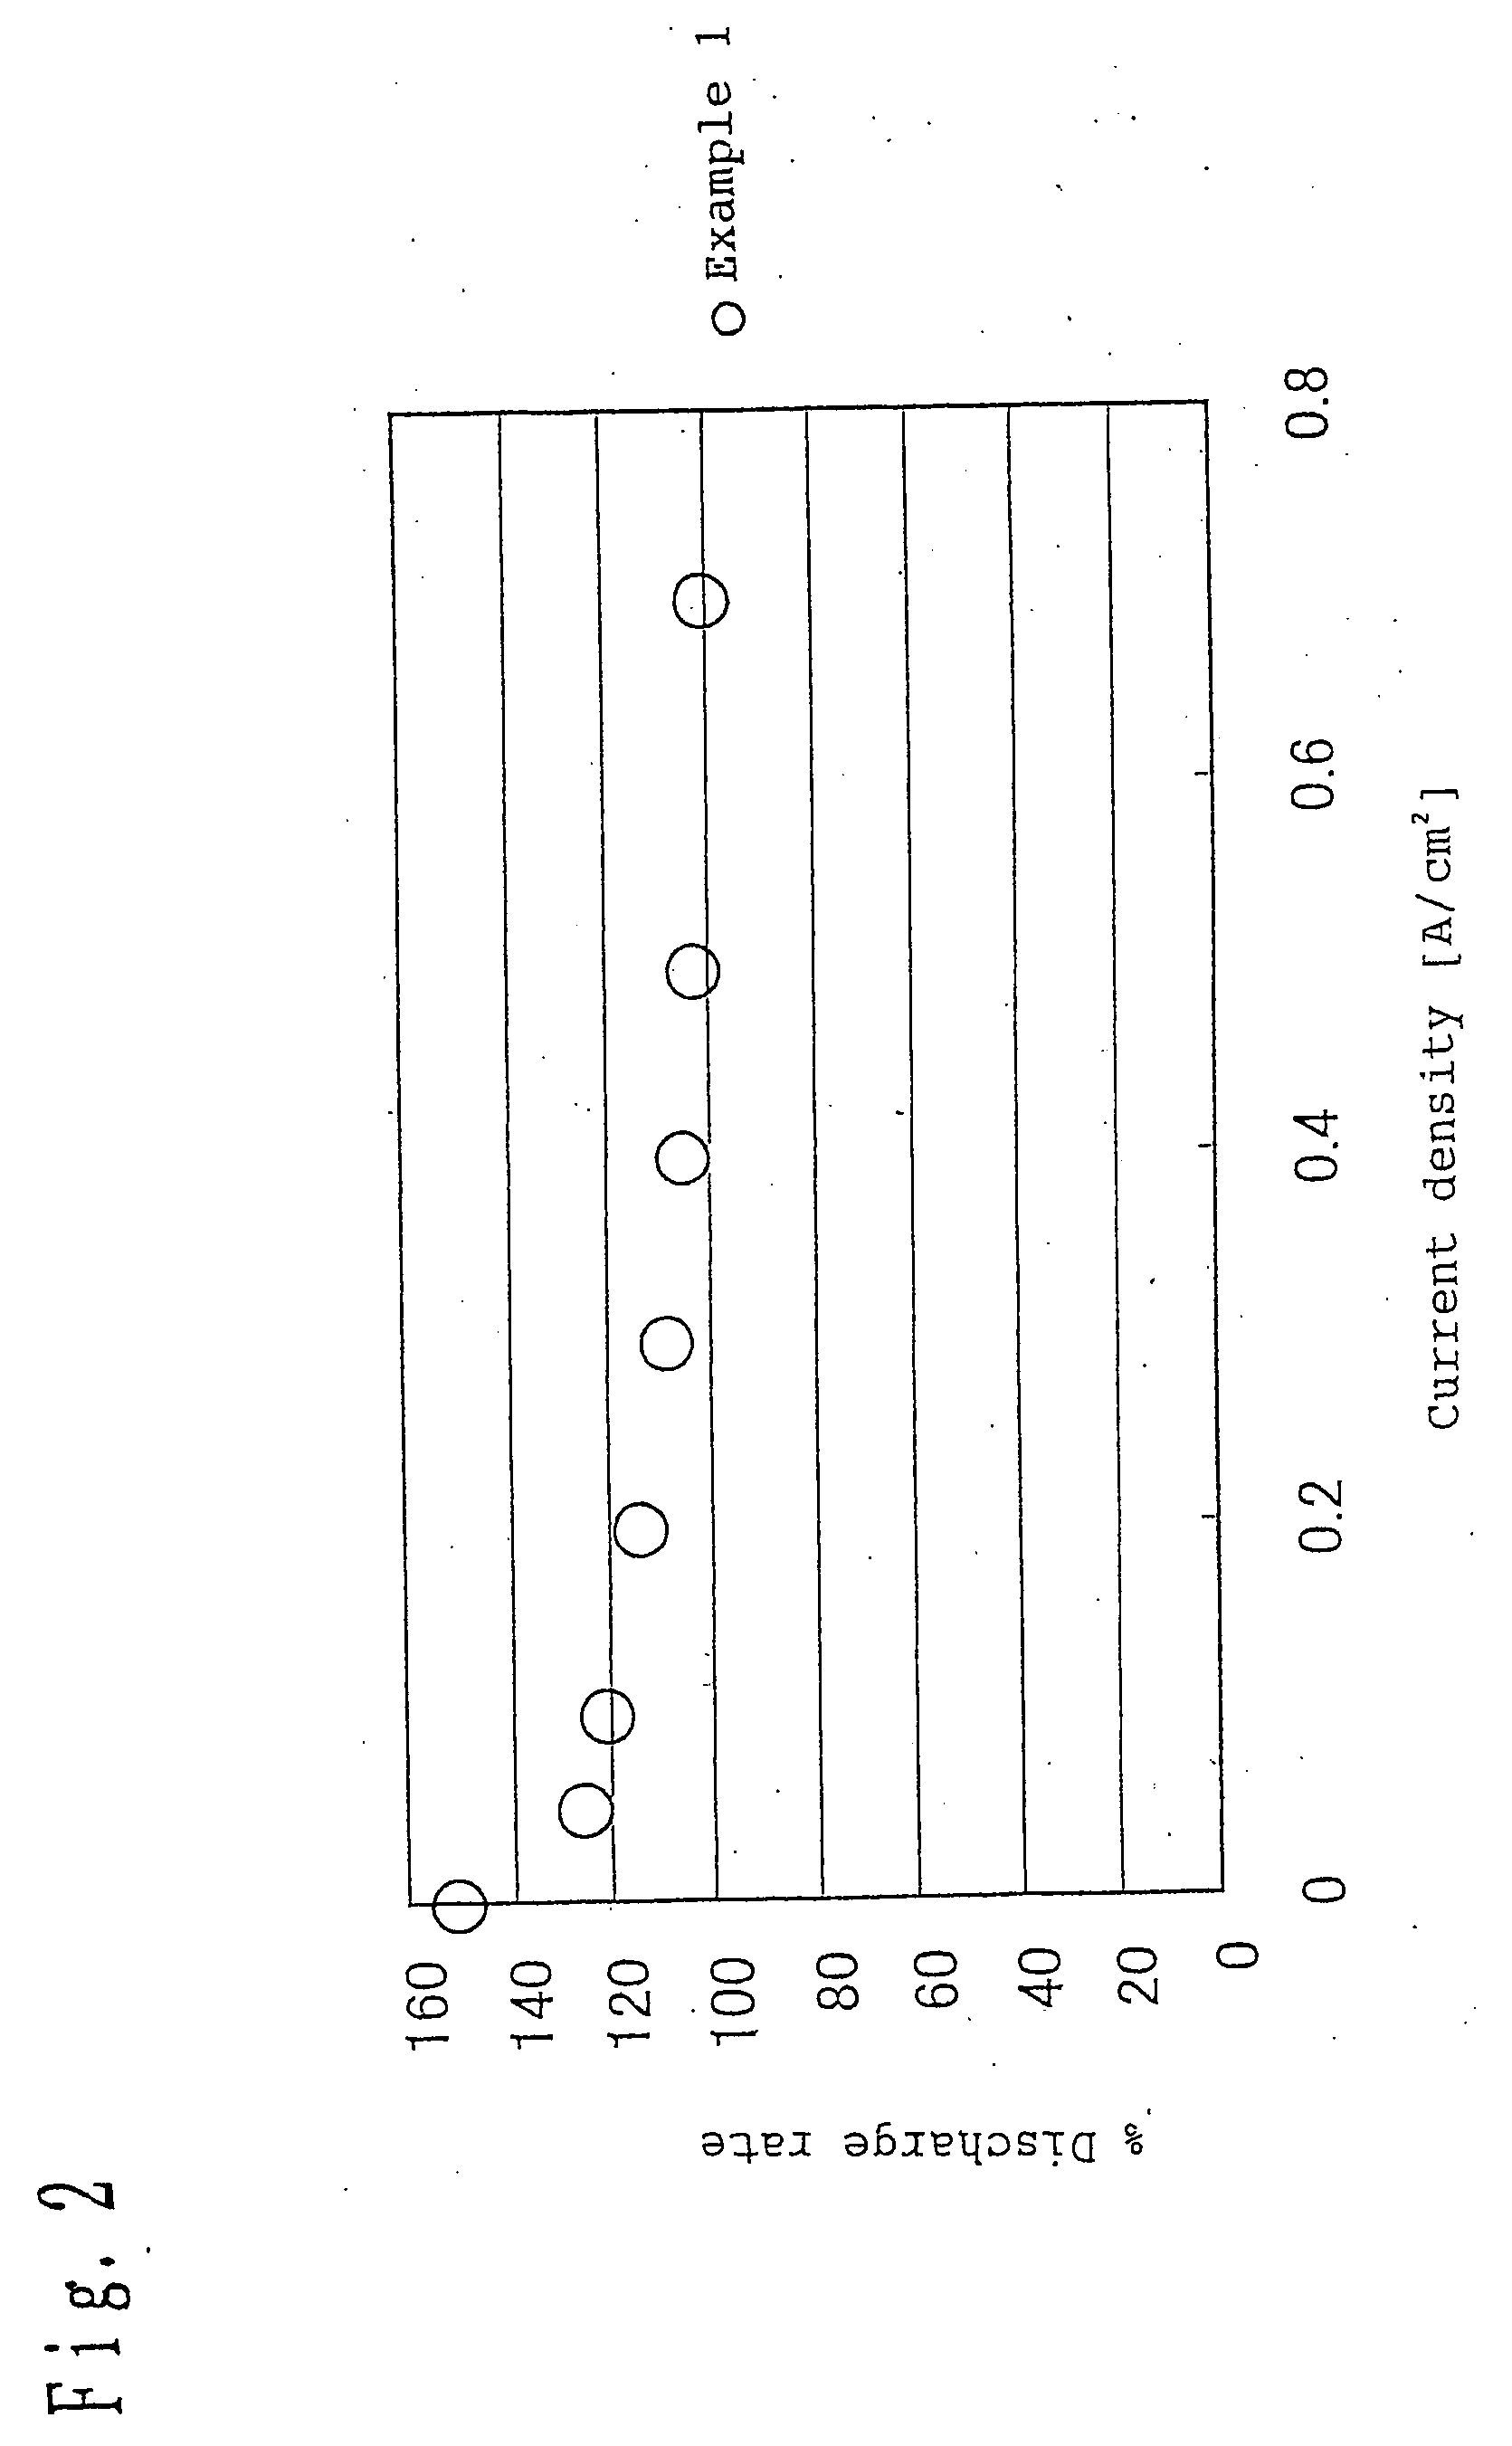 Polymer electrolyte fuel cell, fuel cell electrode, method for producing electrode catalyst layer, and method for producing polymer electrolyte fuel cell